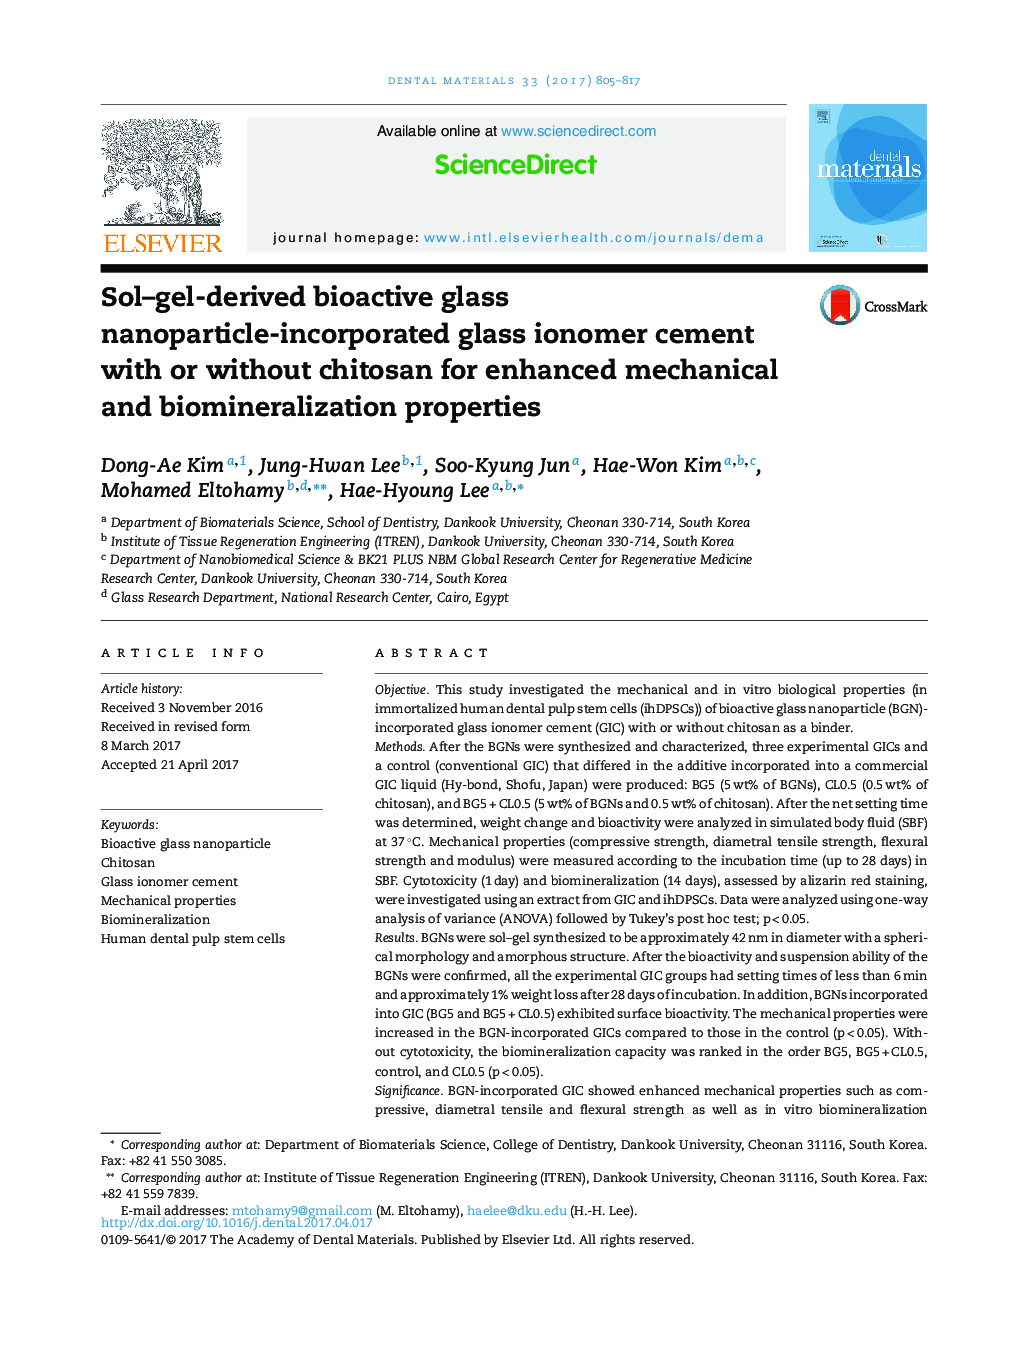 Sol-gel-derived bioactive glass nanoparticle-incorporated glass ionomer cement with or without chitosan for enhanced mechanical and biomineralization properties